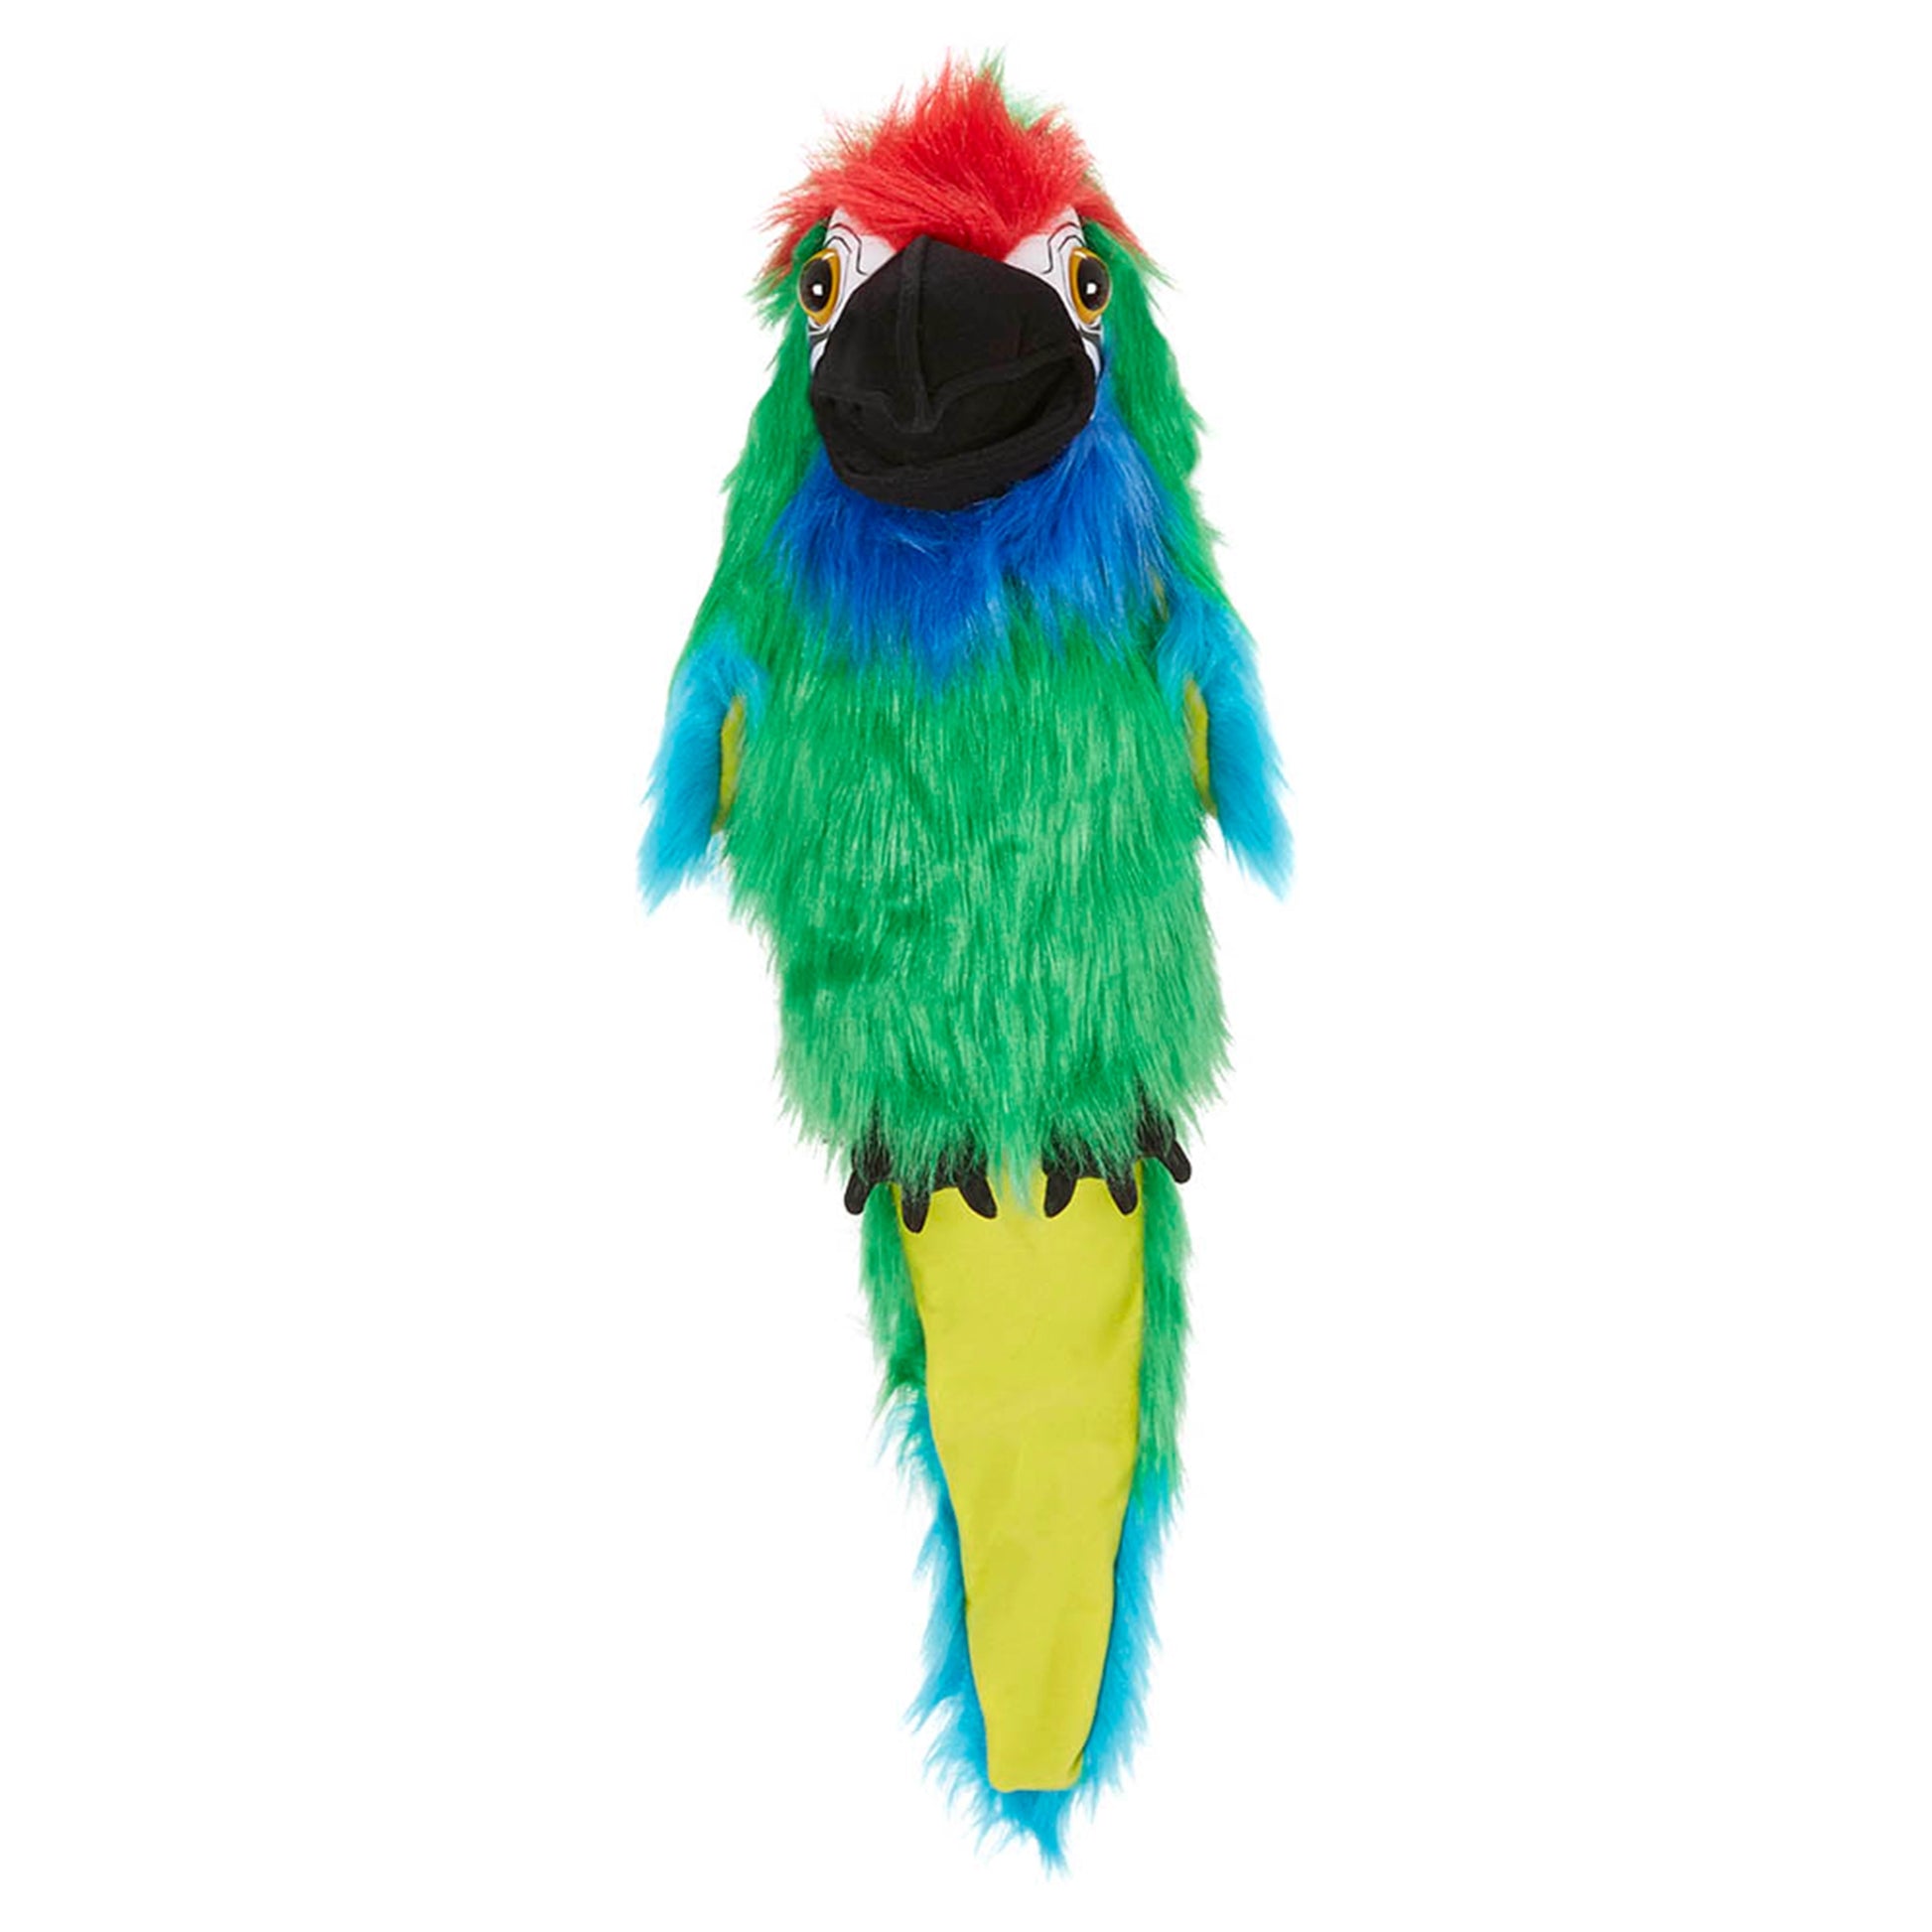 Military Macaw - Large Bird Puppet - The Puppet Company - The Forgotten Toy Shop